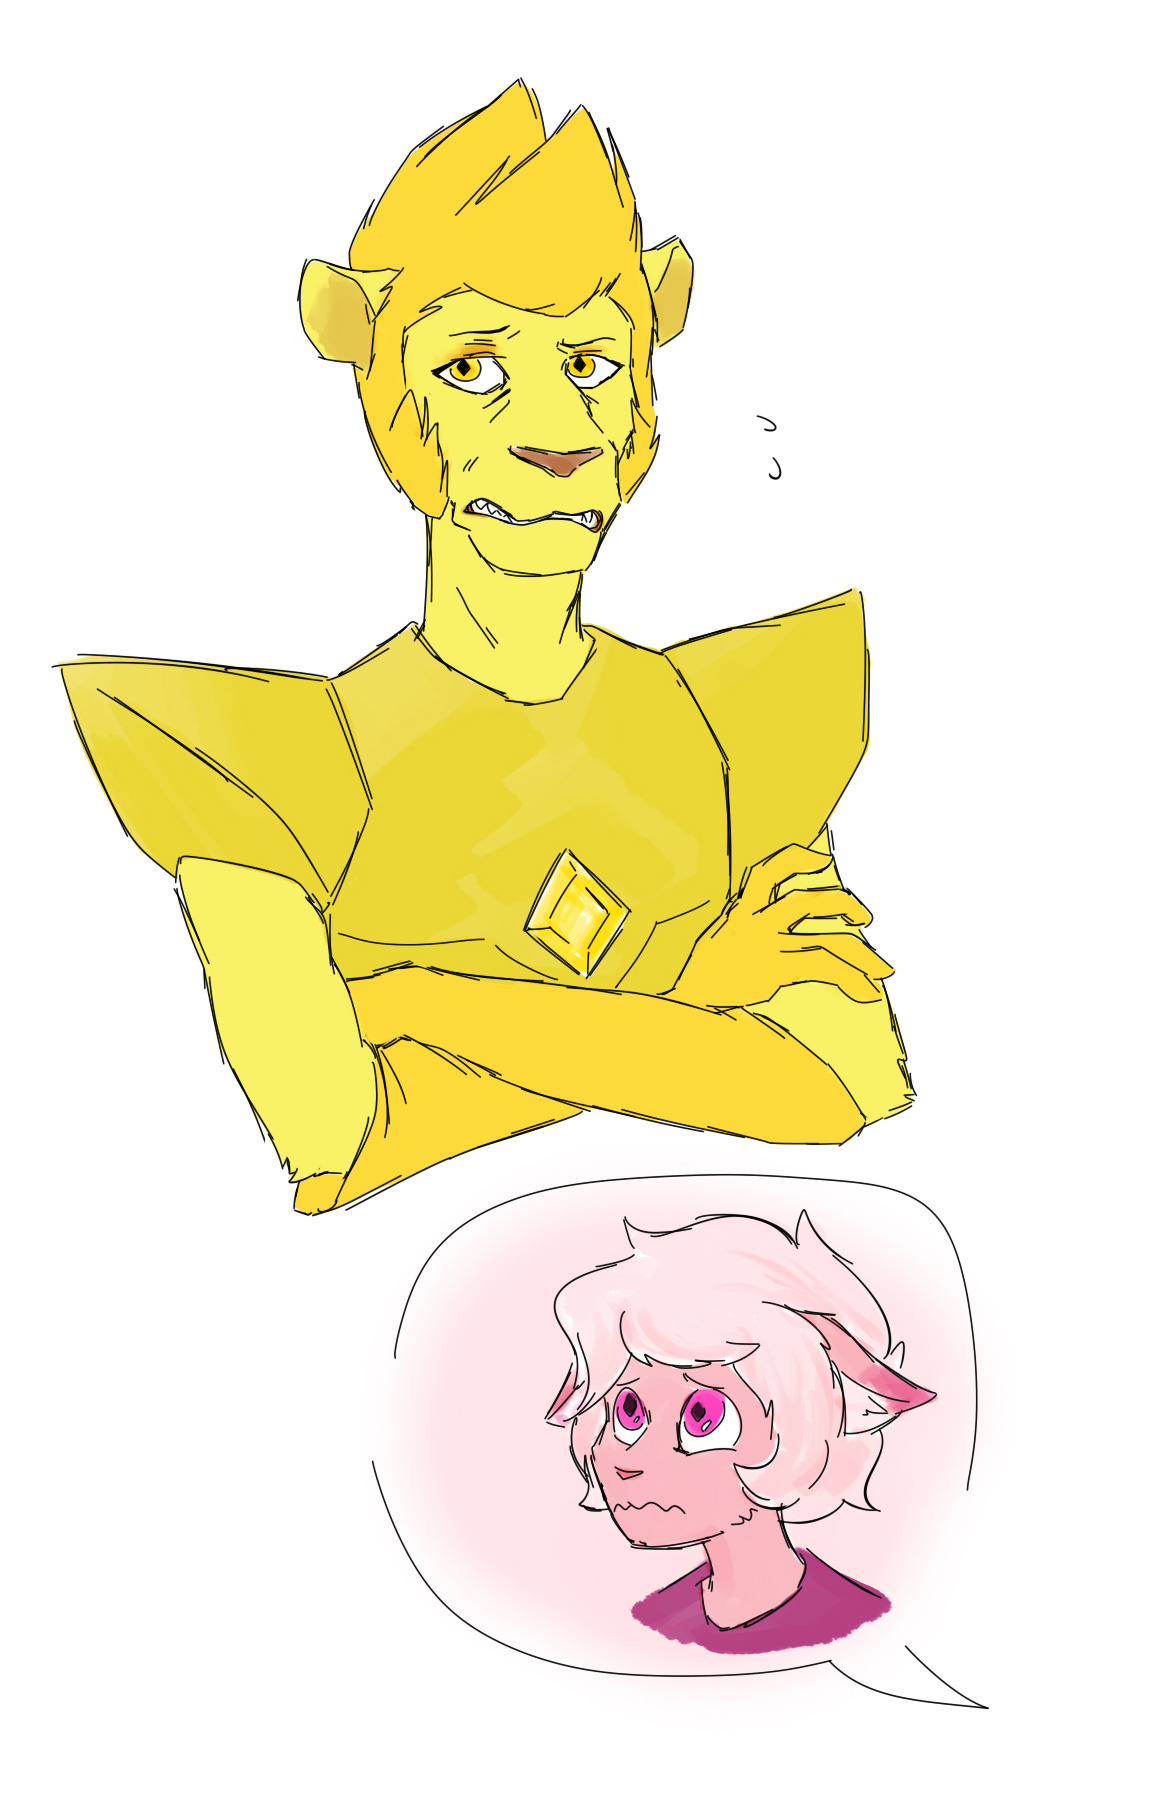 Anthro dump: Diamonds edition The reason Pink’s size is inconsistent is because I don’t know her exact canon size except that she was smaller than the other Diamonds, so I took some liberties with it.